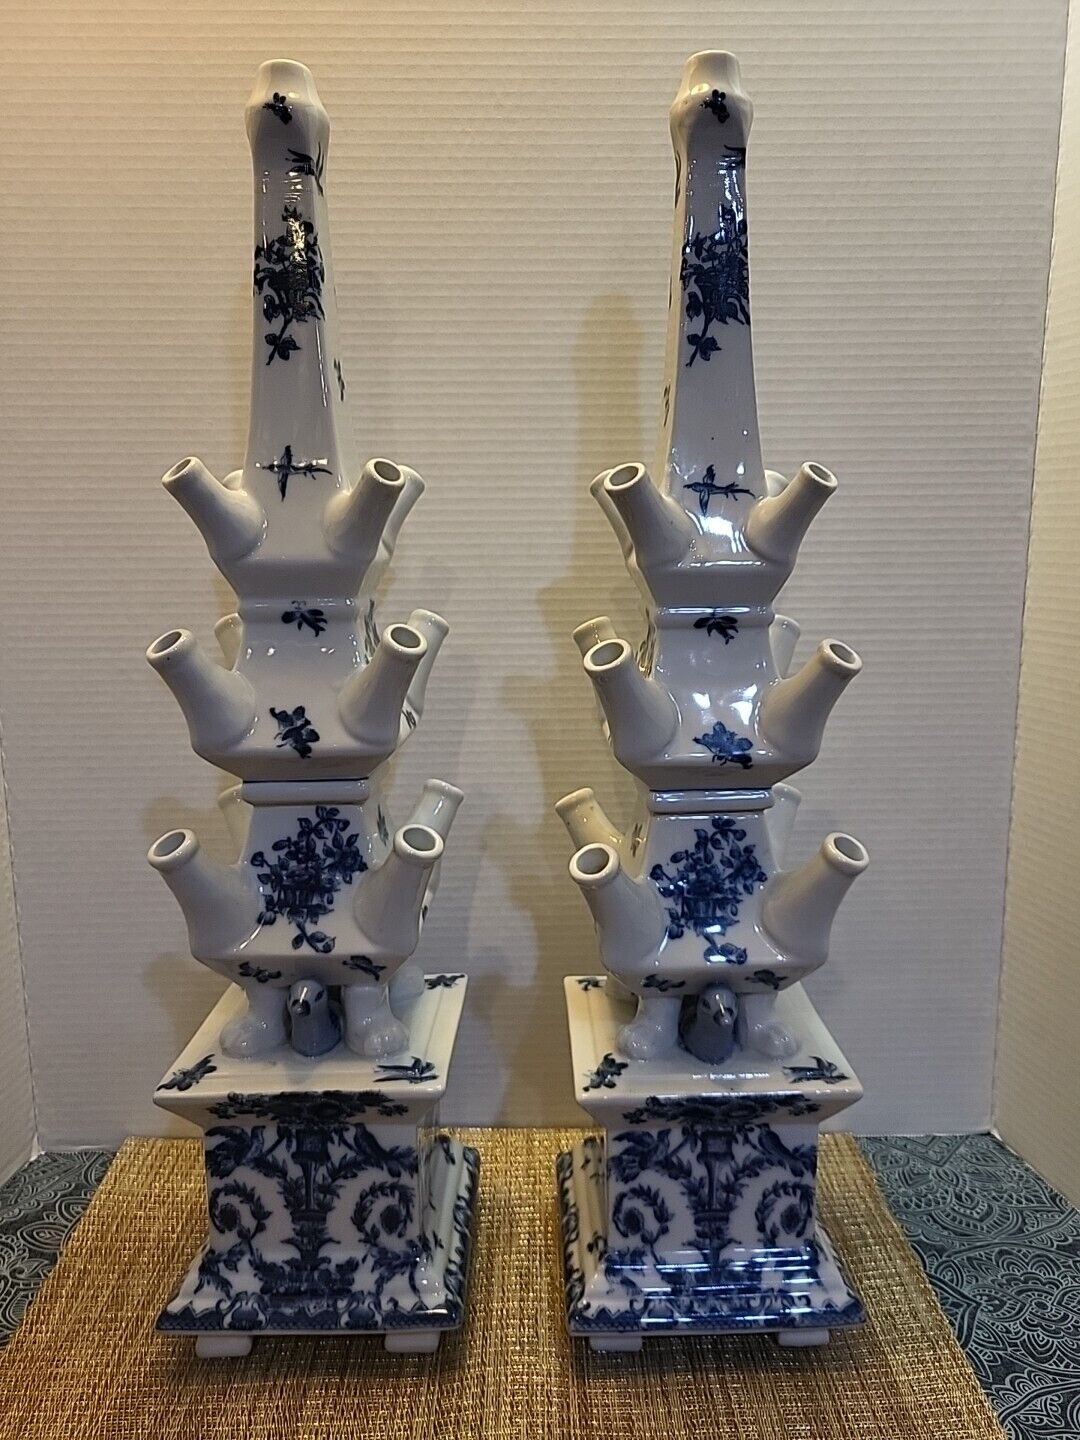 Vintage Pair of Tall Three Tiered Porcelain Tulipiere Vases By SP COLLECTION